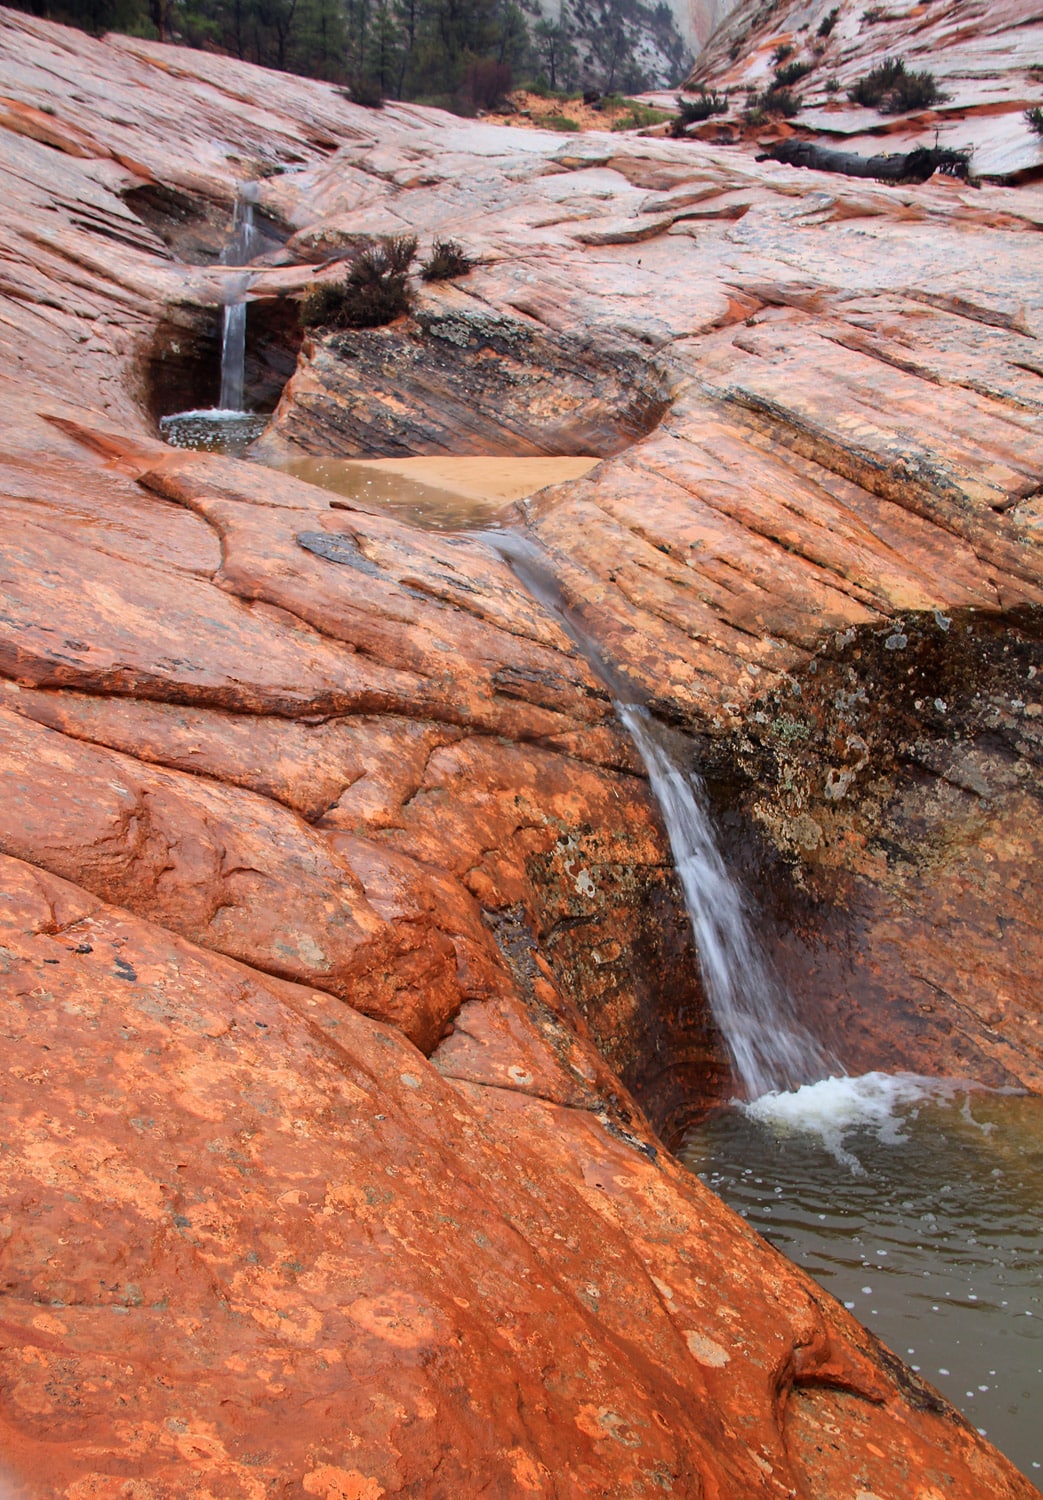 Small waterfalls stair-step their way down across formations in Zion National Park